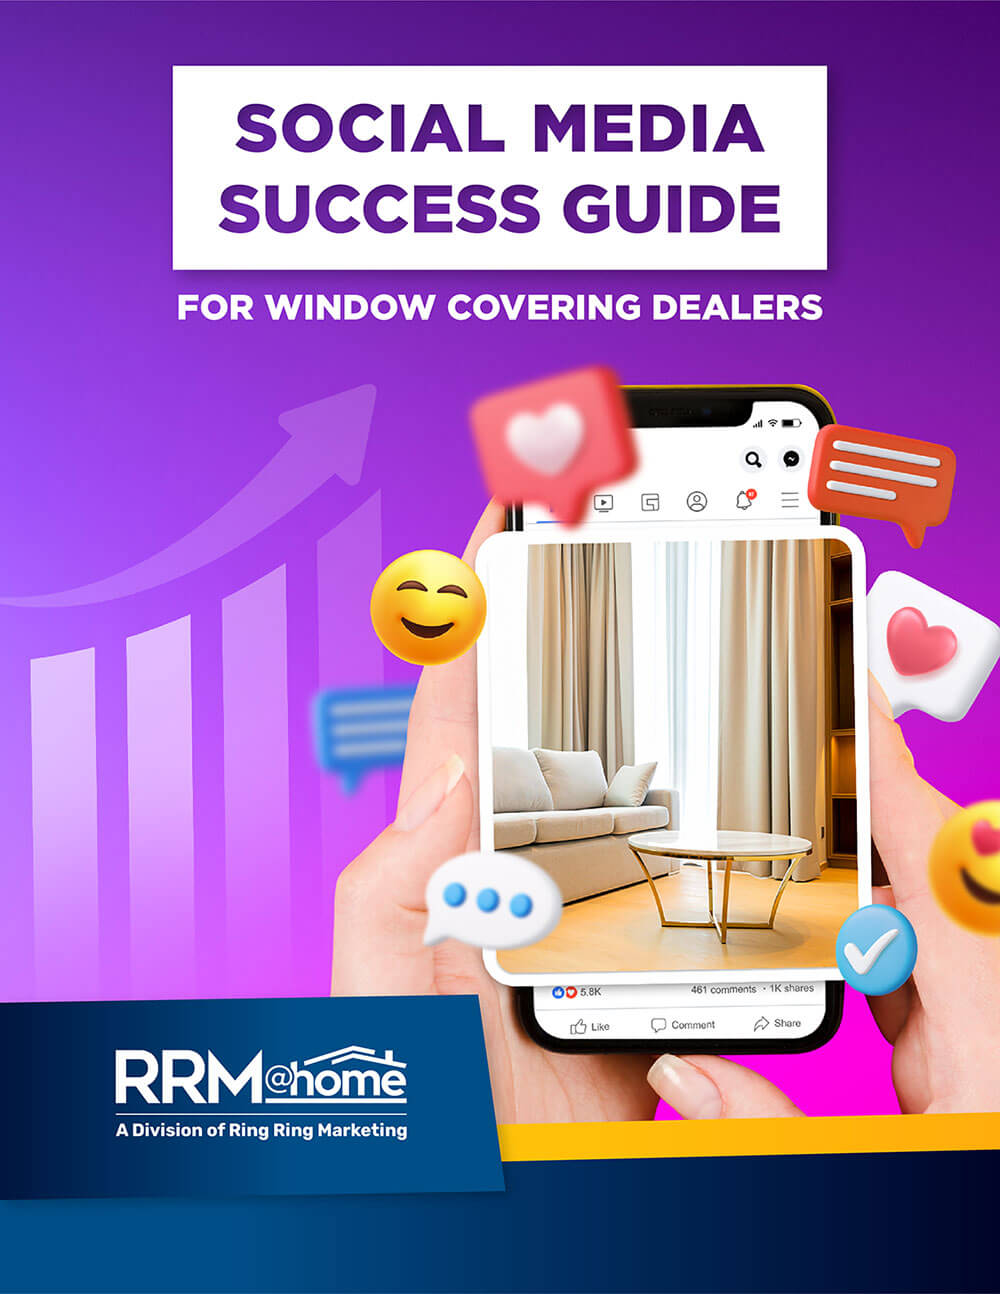 Social Media Success Guide for Window Covering Dealers